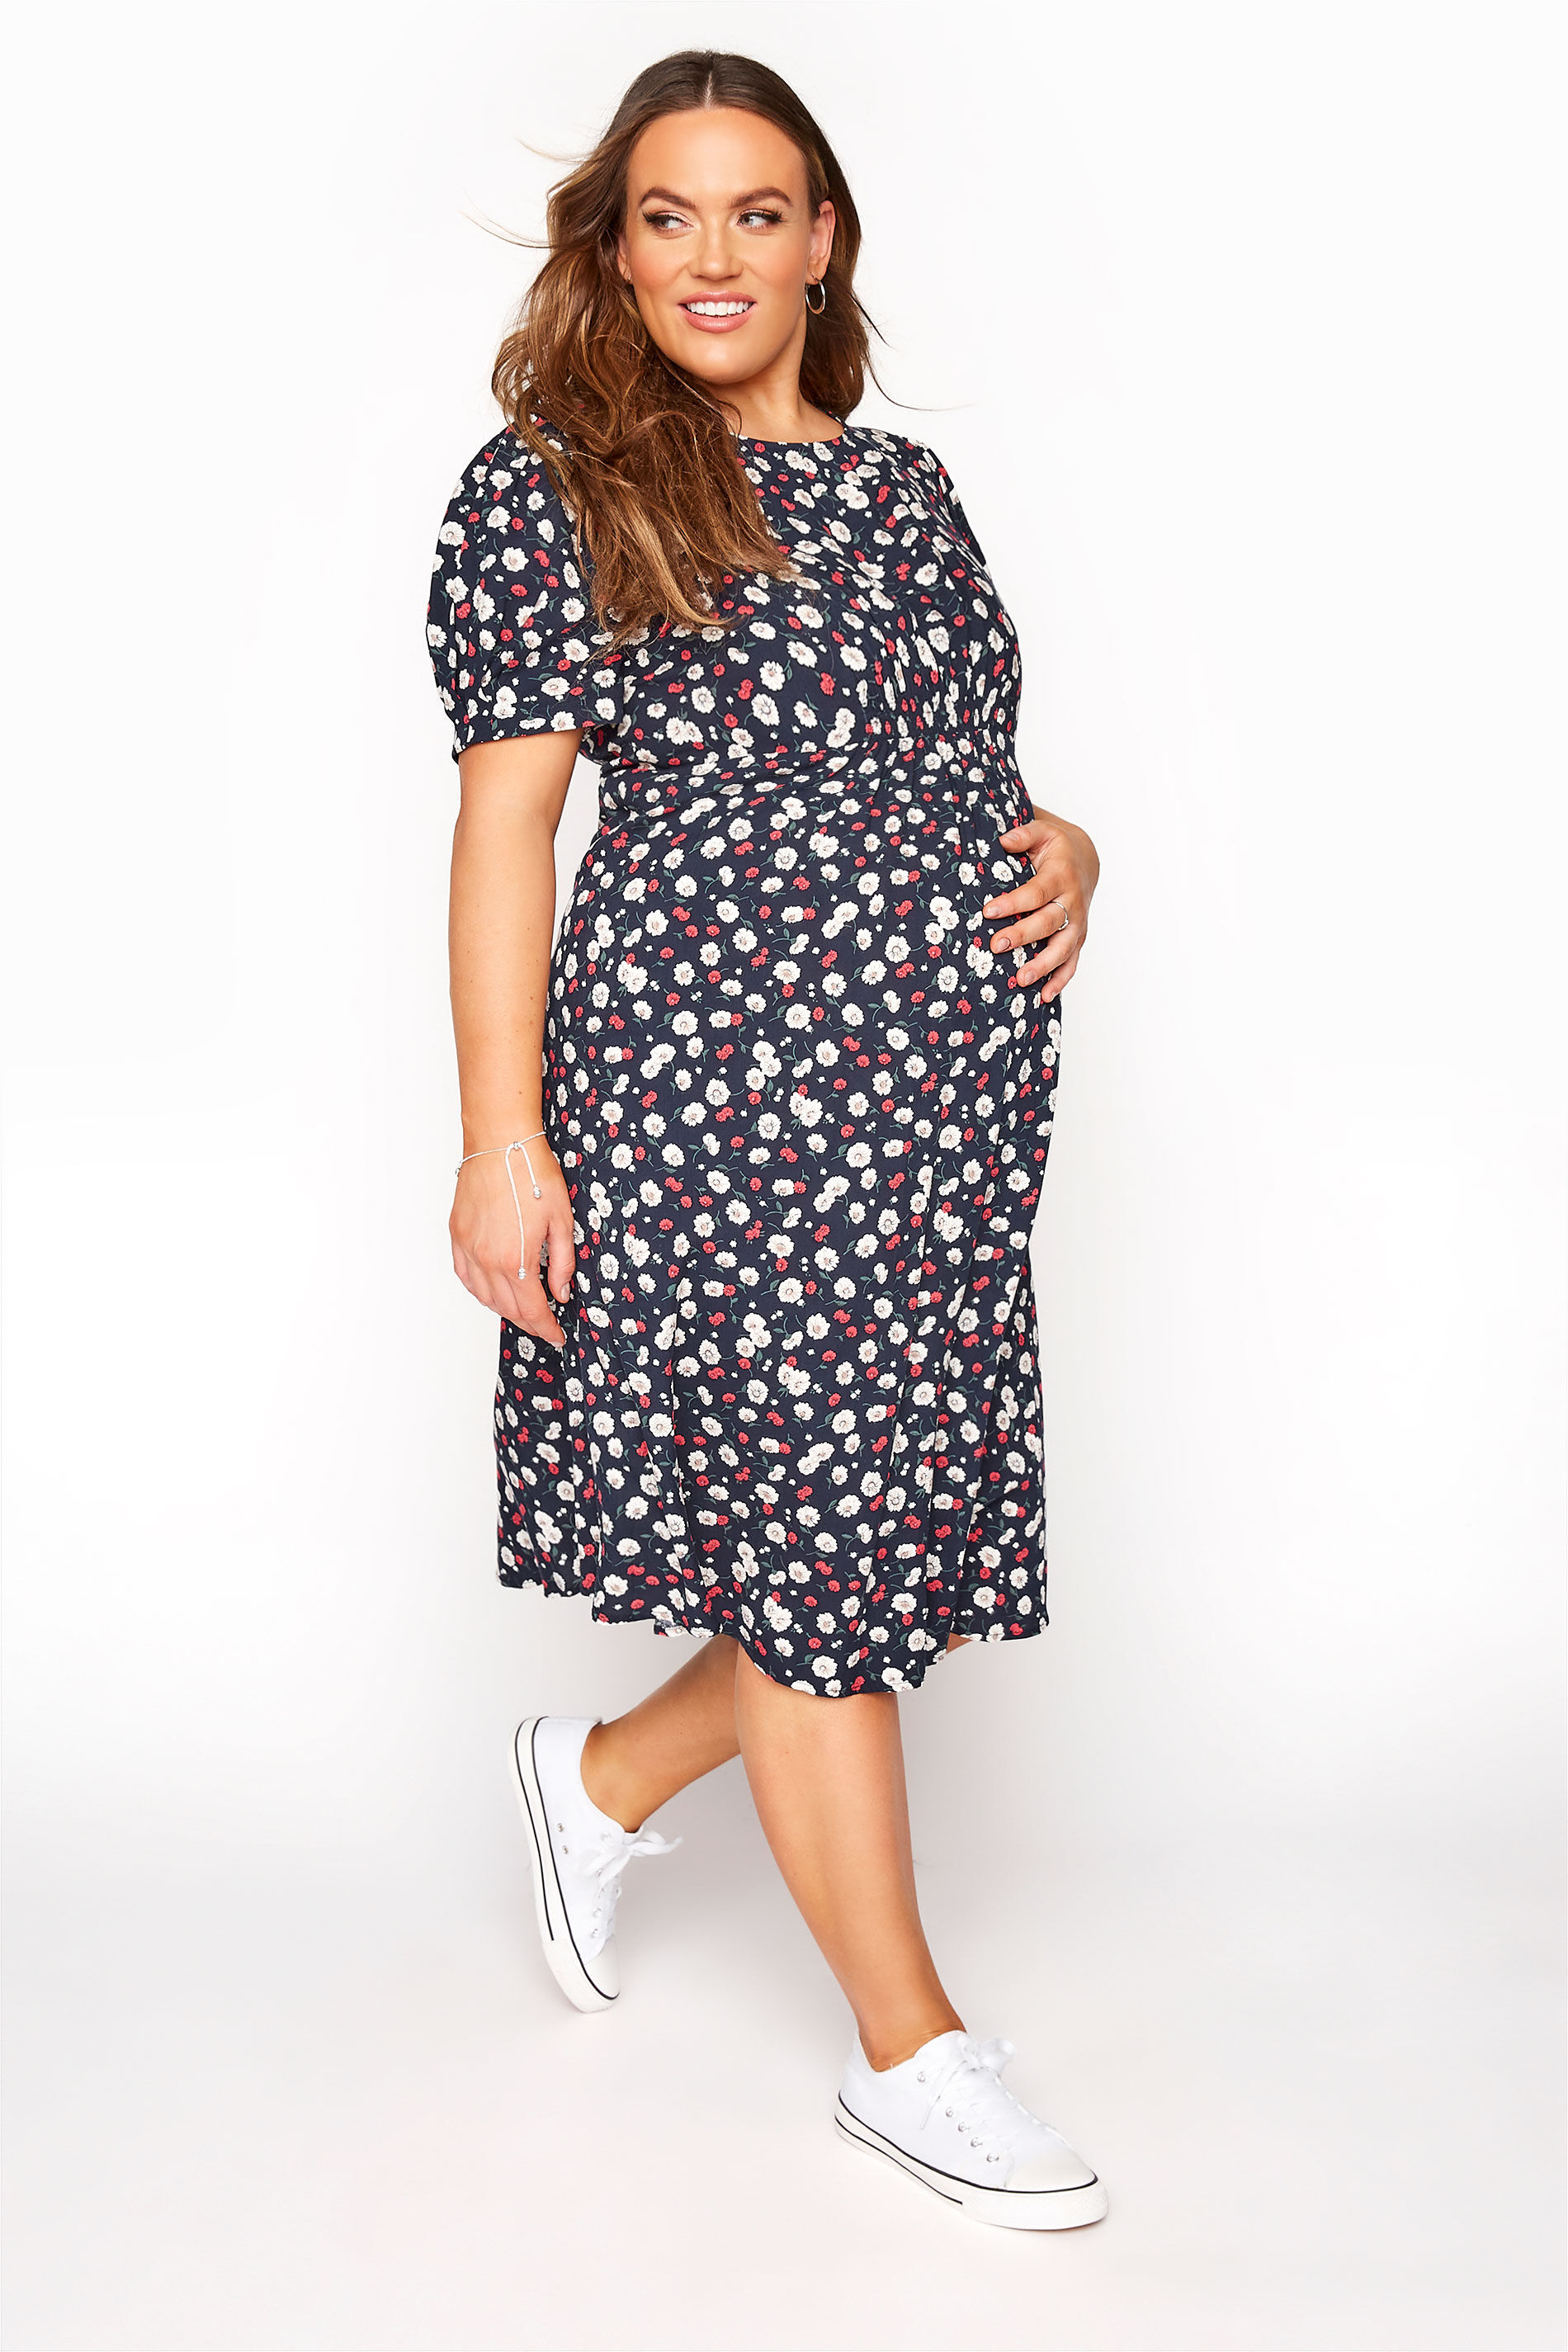 Yours Clothing Bump it up maternity multi floral puff sleeve midi dress